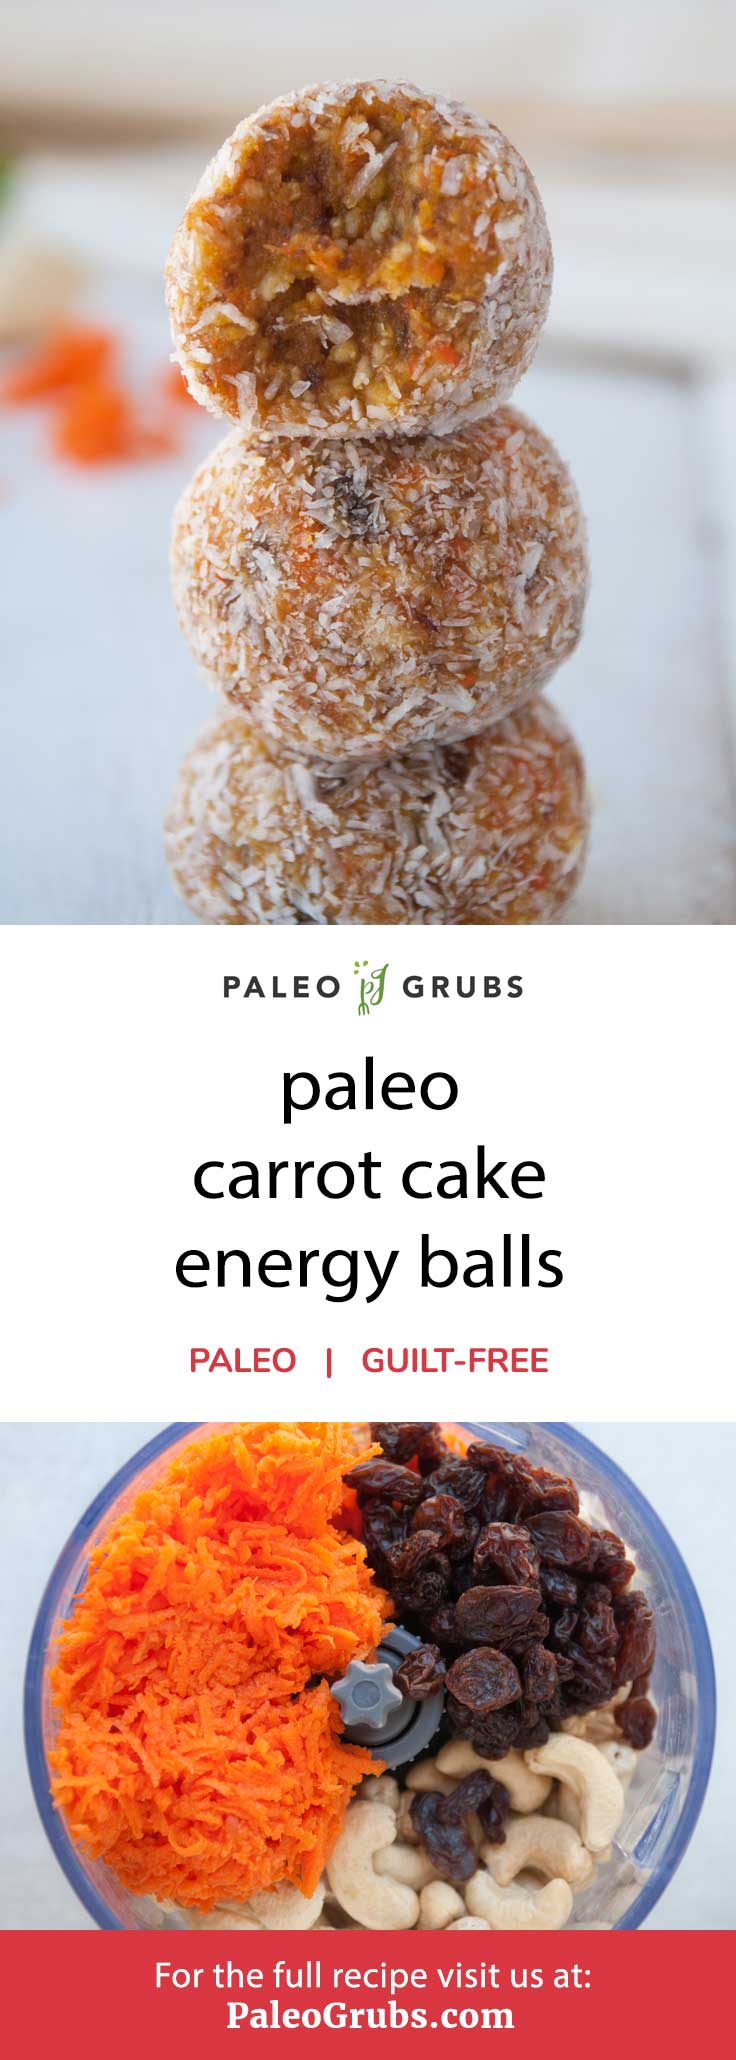 These healthy and addictive carrot cake energy balls are the best for fulfilling all your carrot cake cravings.